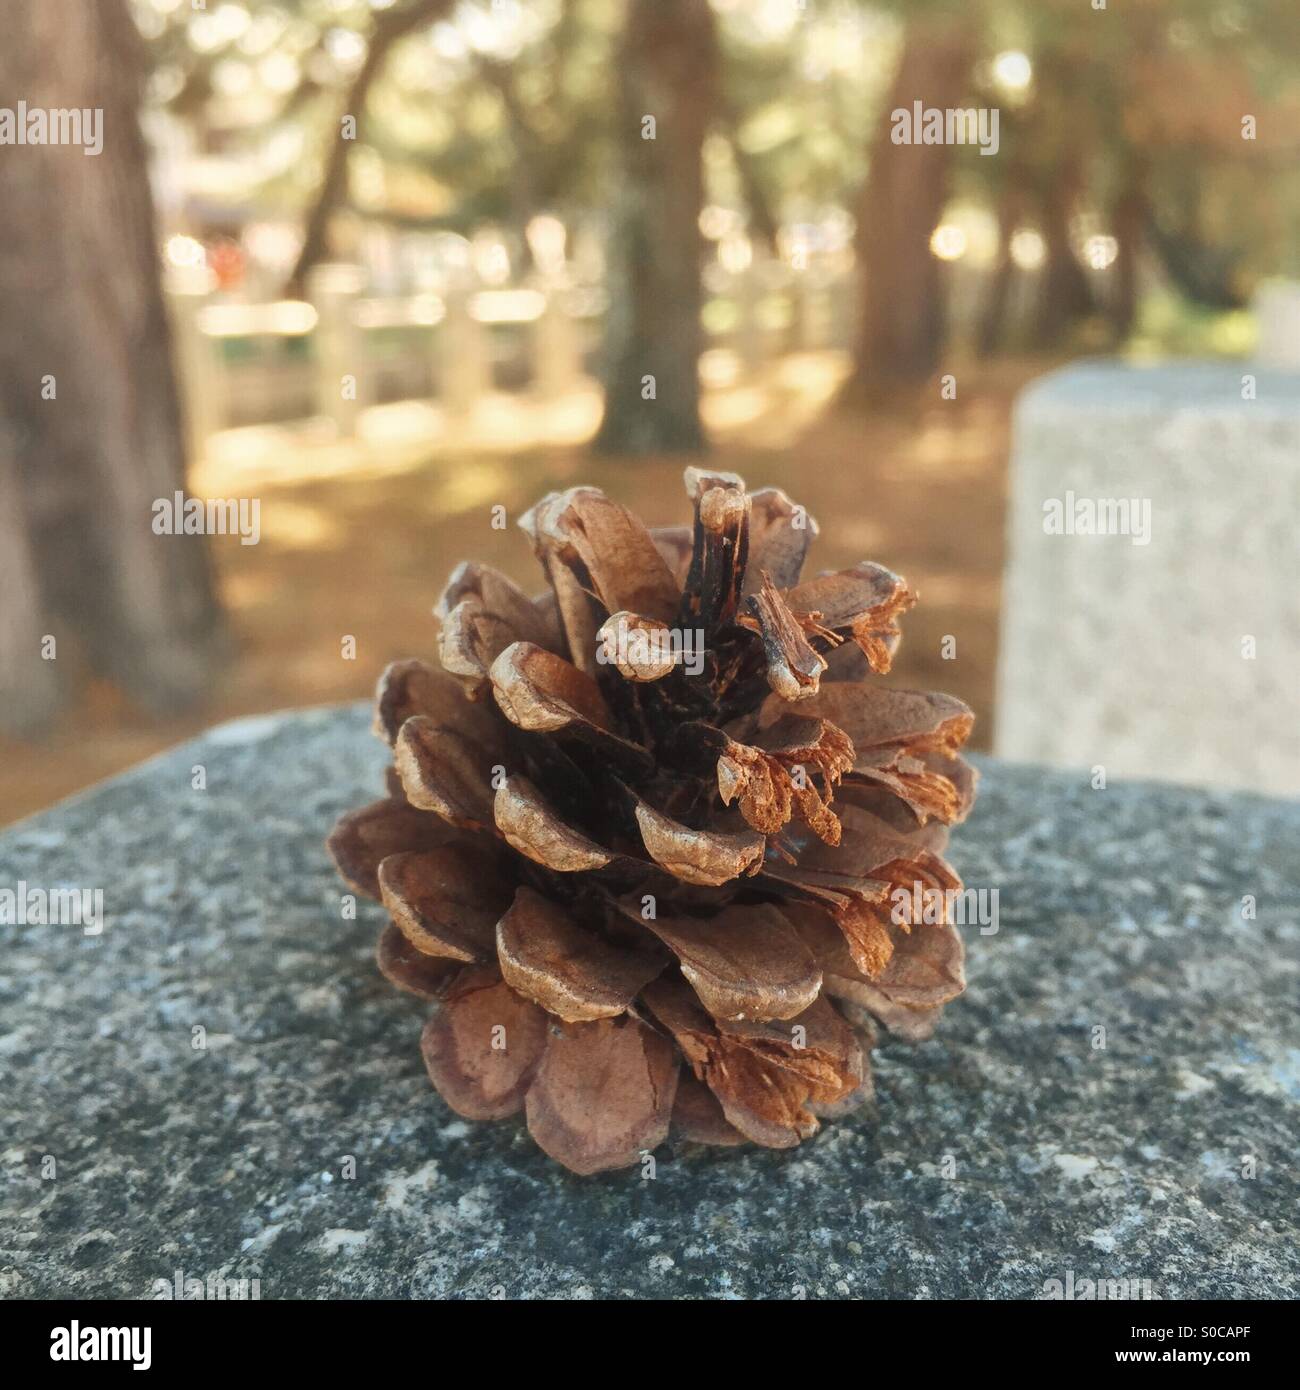 Single pine cone on granite slab, with muted color palette for a vintage feel. Stock Photo